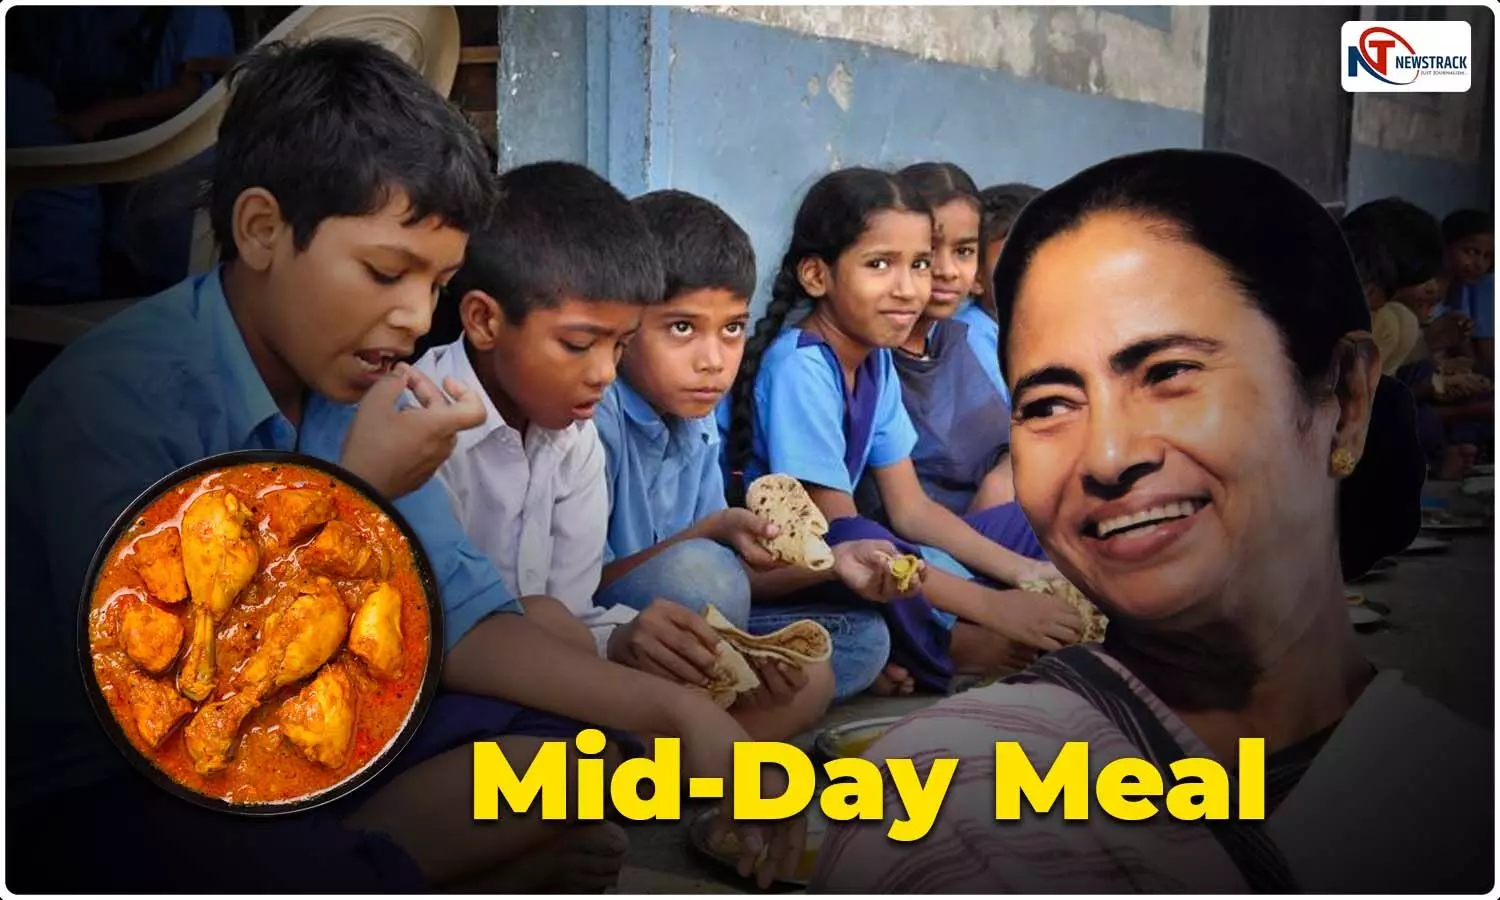 Students get Chicken in Mid Day Meal